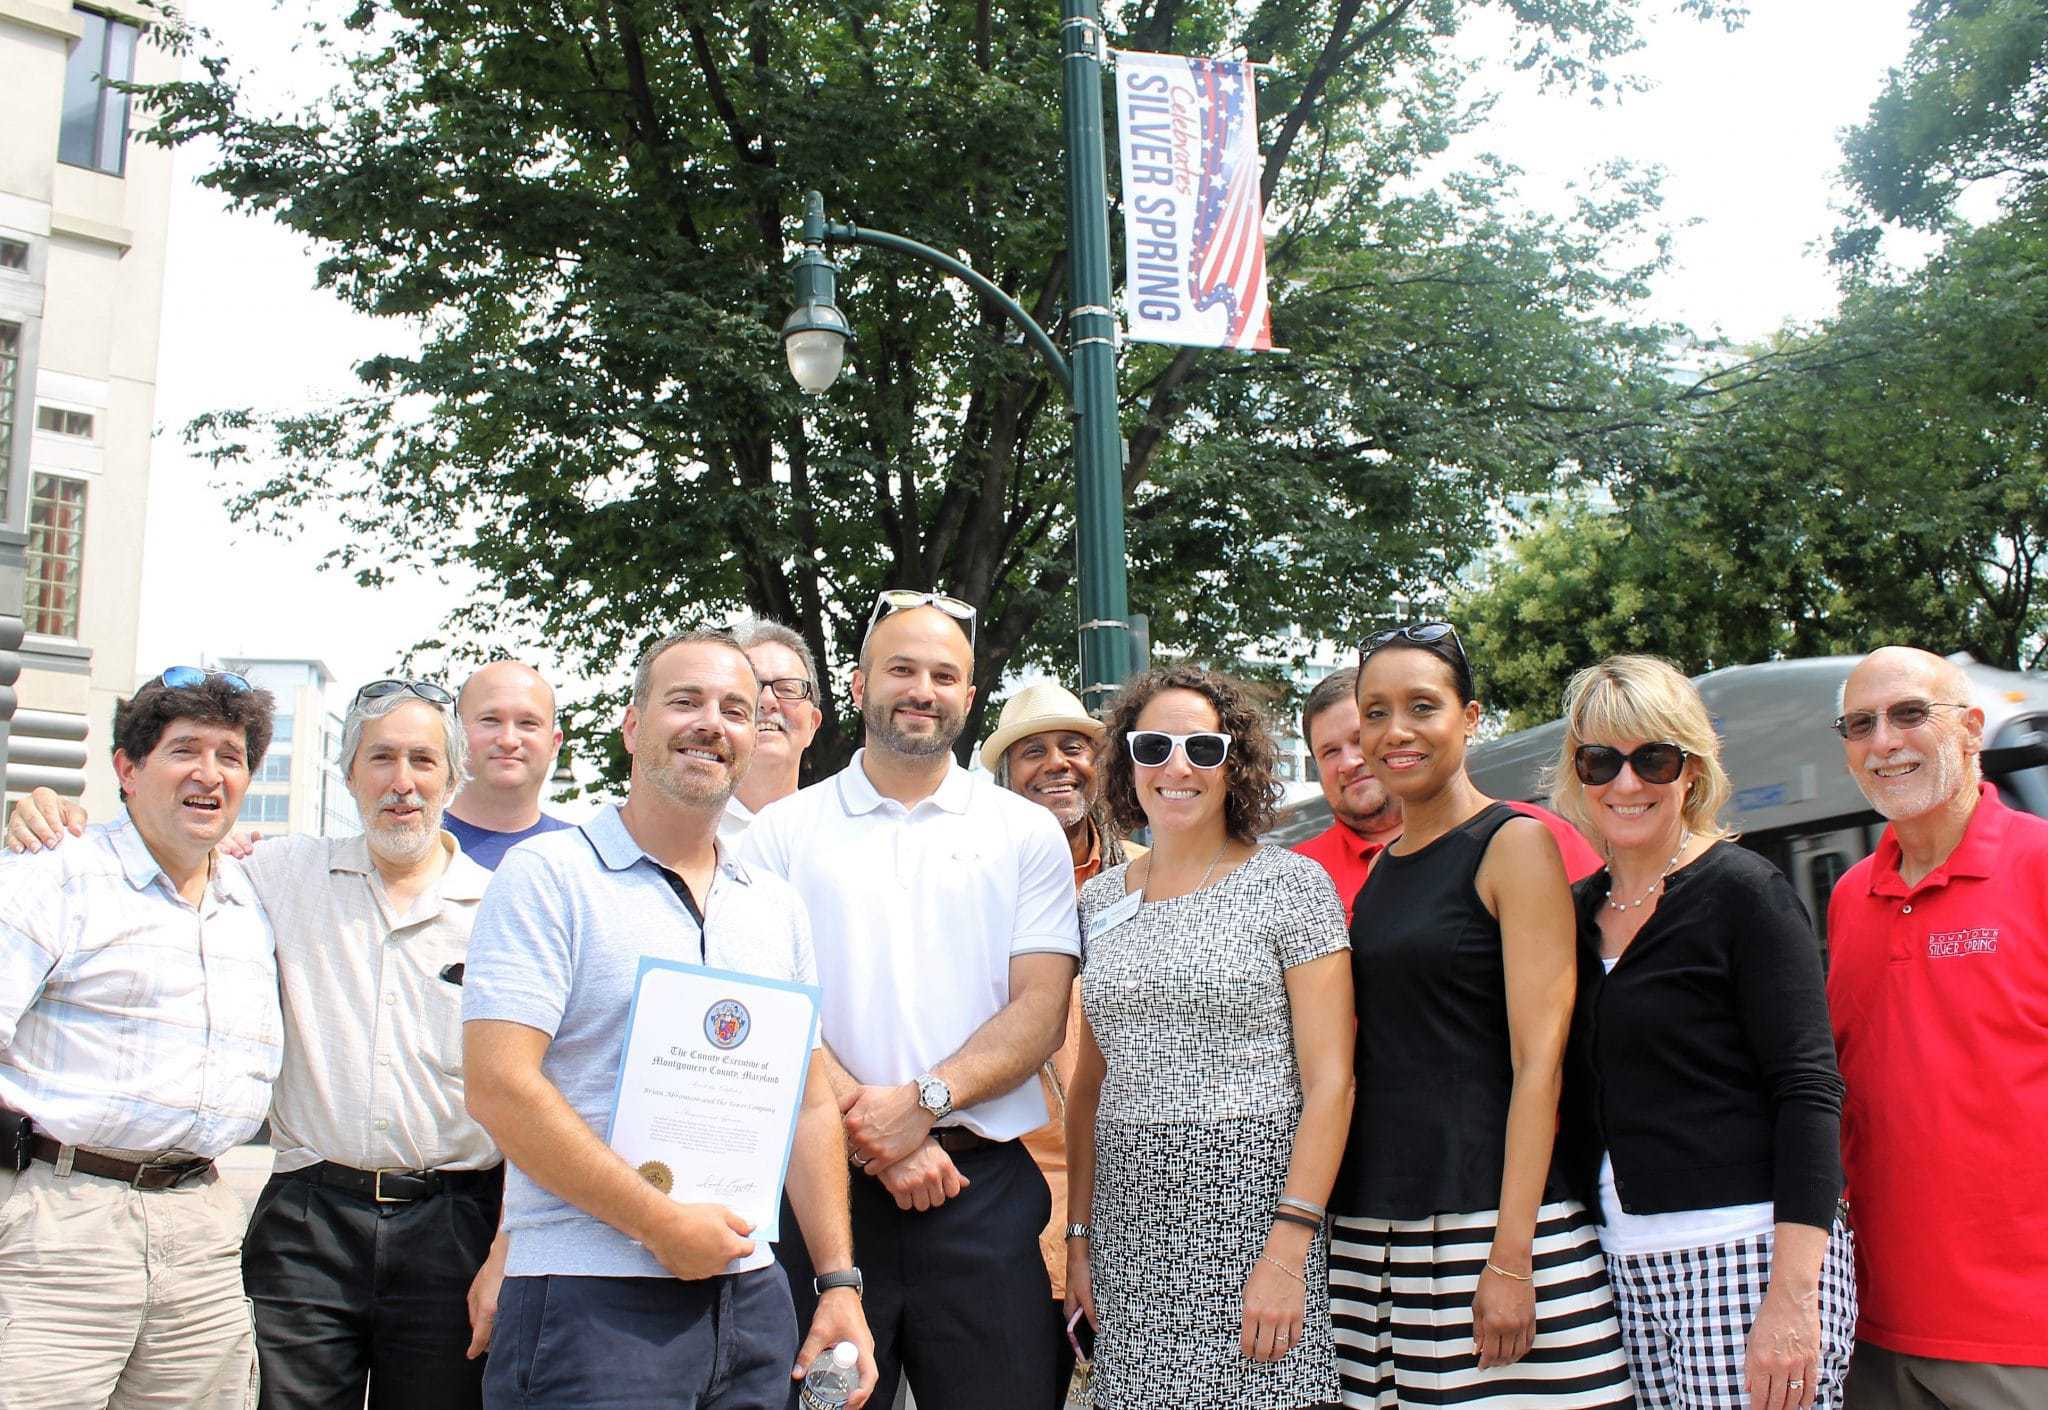 Downtown Silver Spring banners unveiled